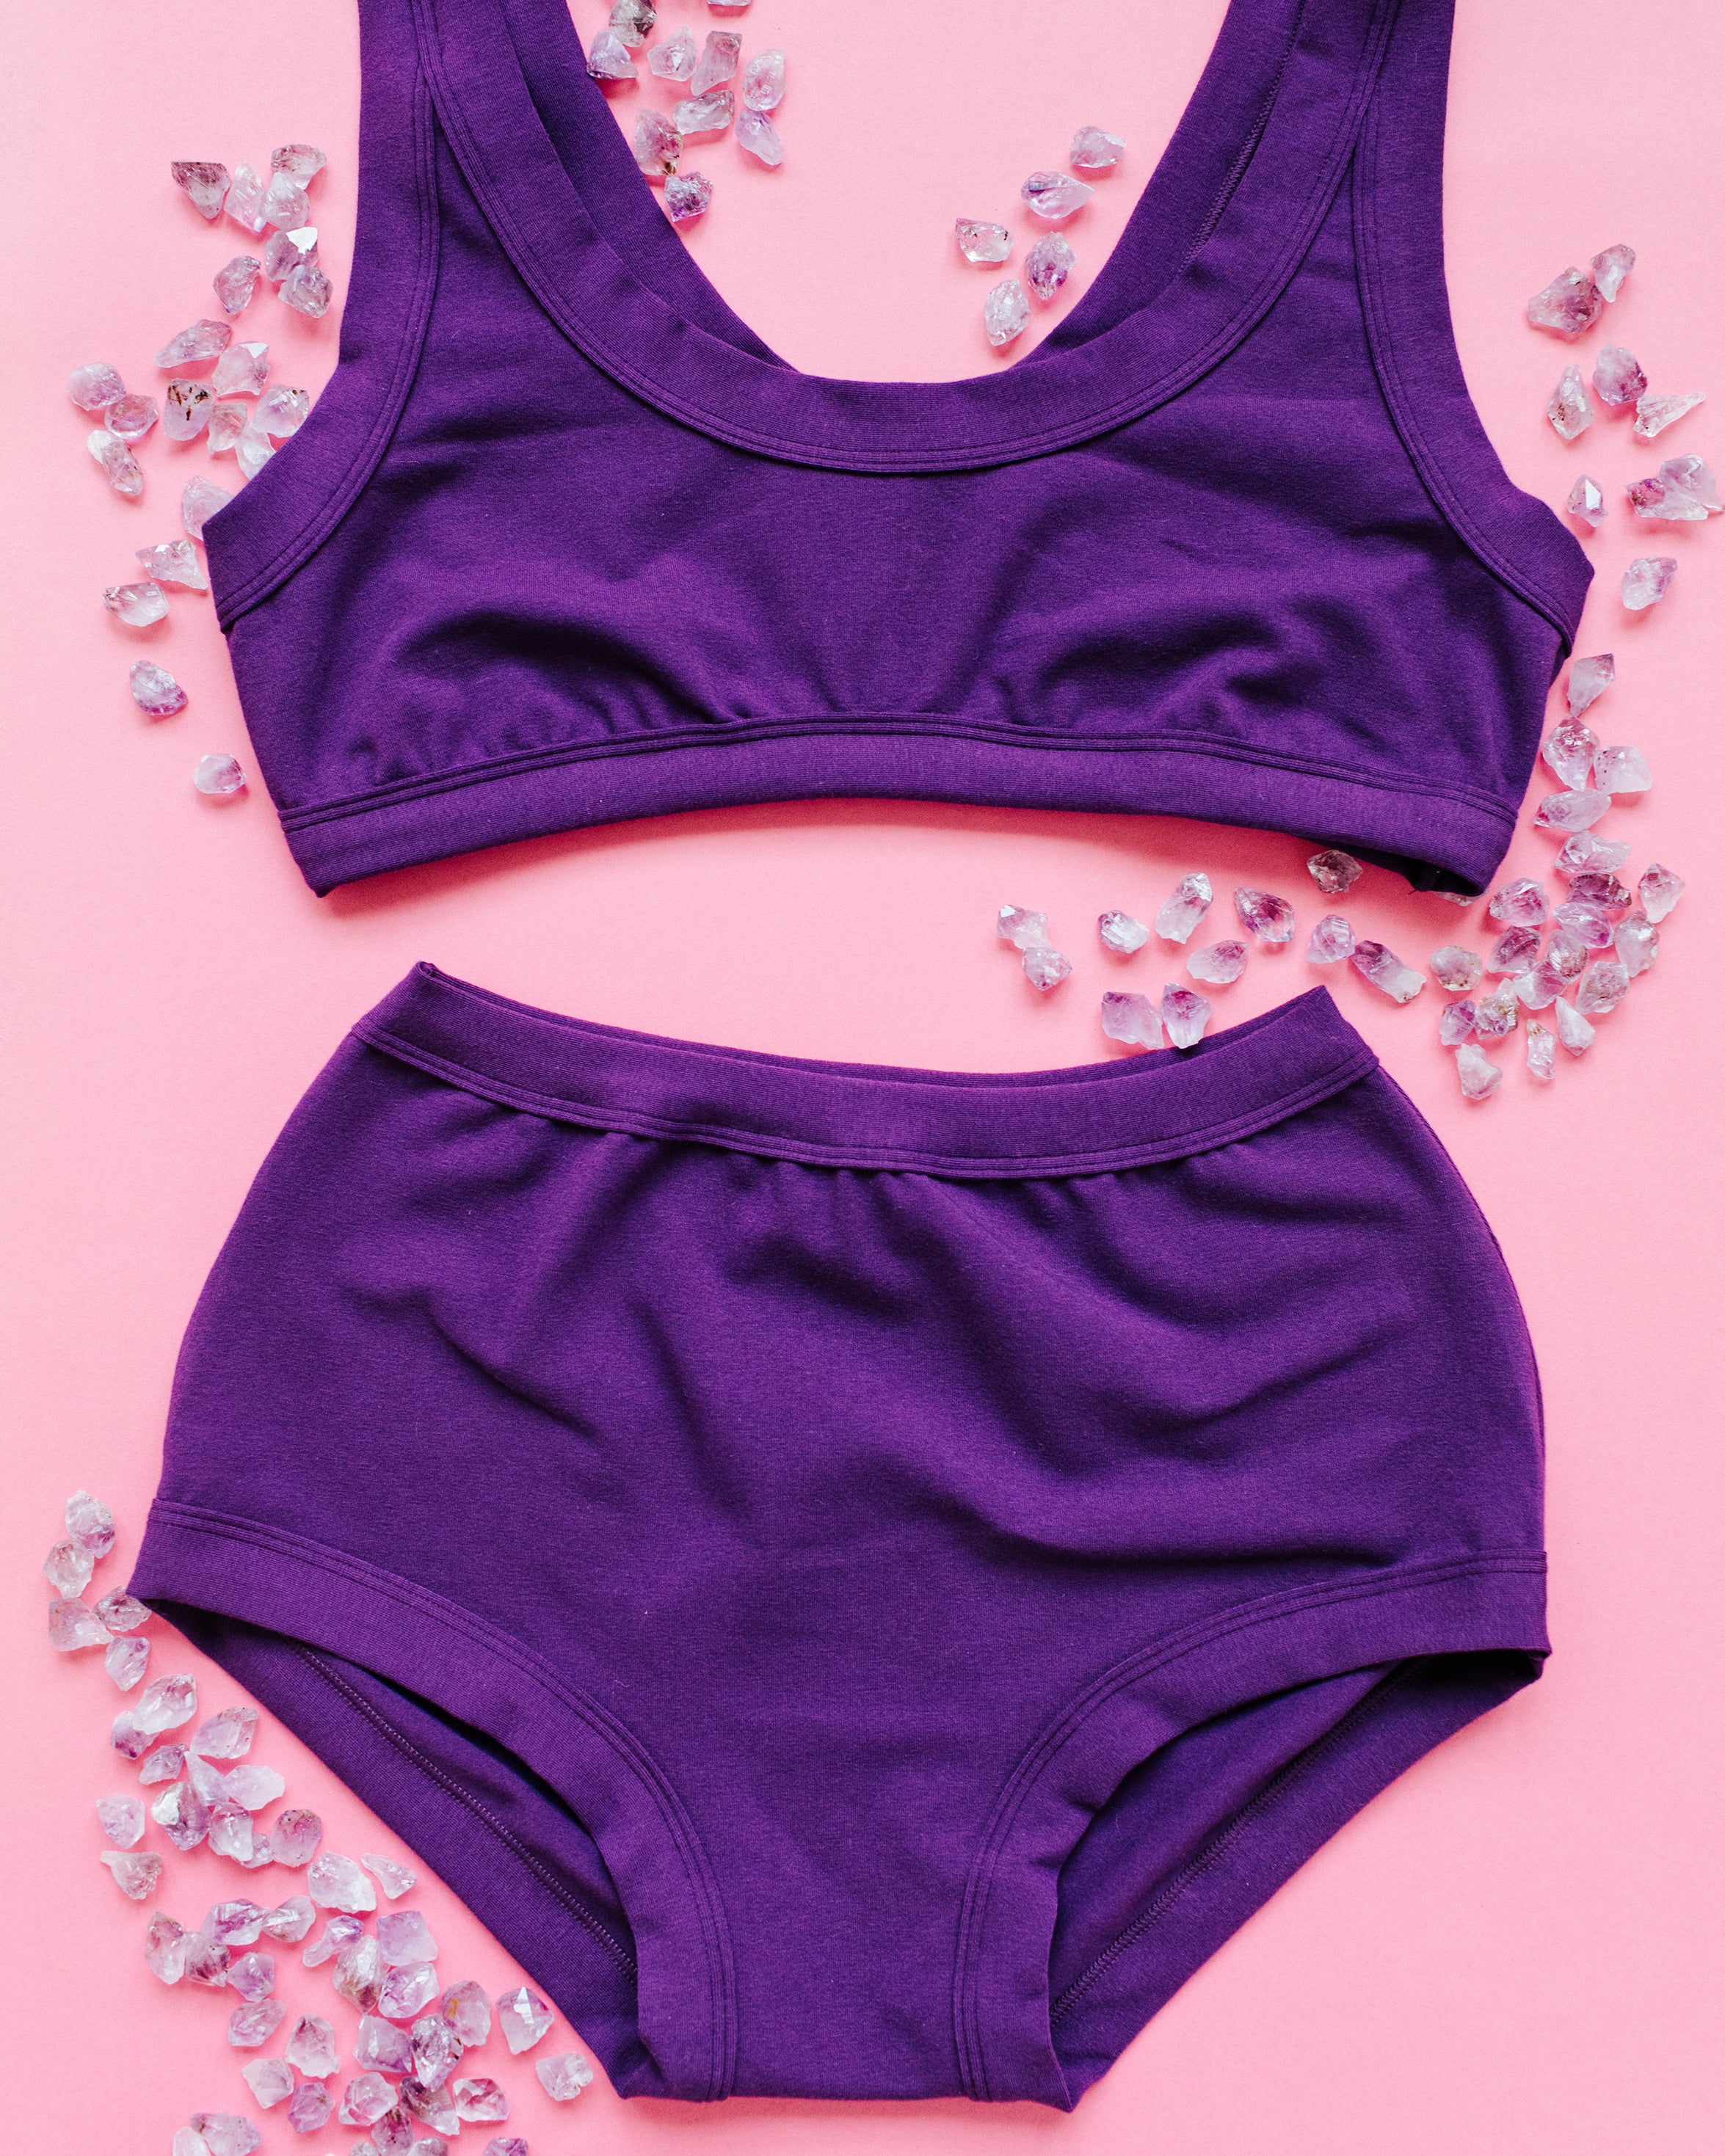 Flat lay of purple Deep Amethyst Original style underwear and Bralette on a pink surface with small amethyst stones surrounding.